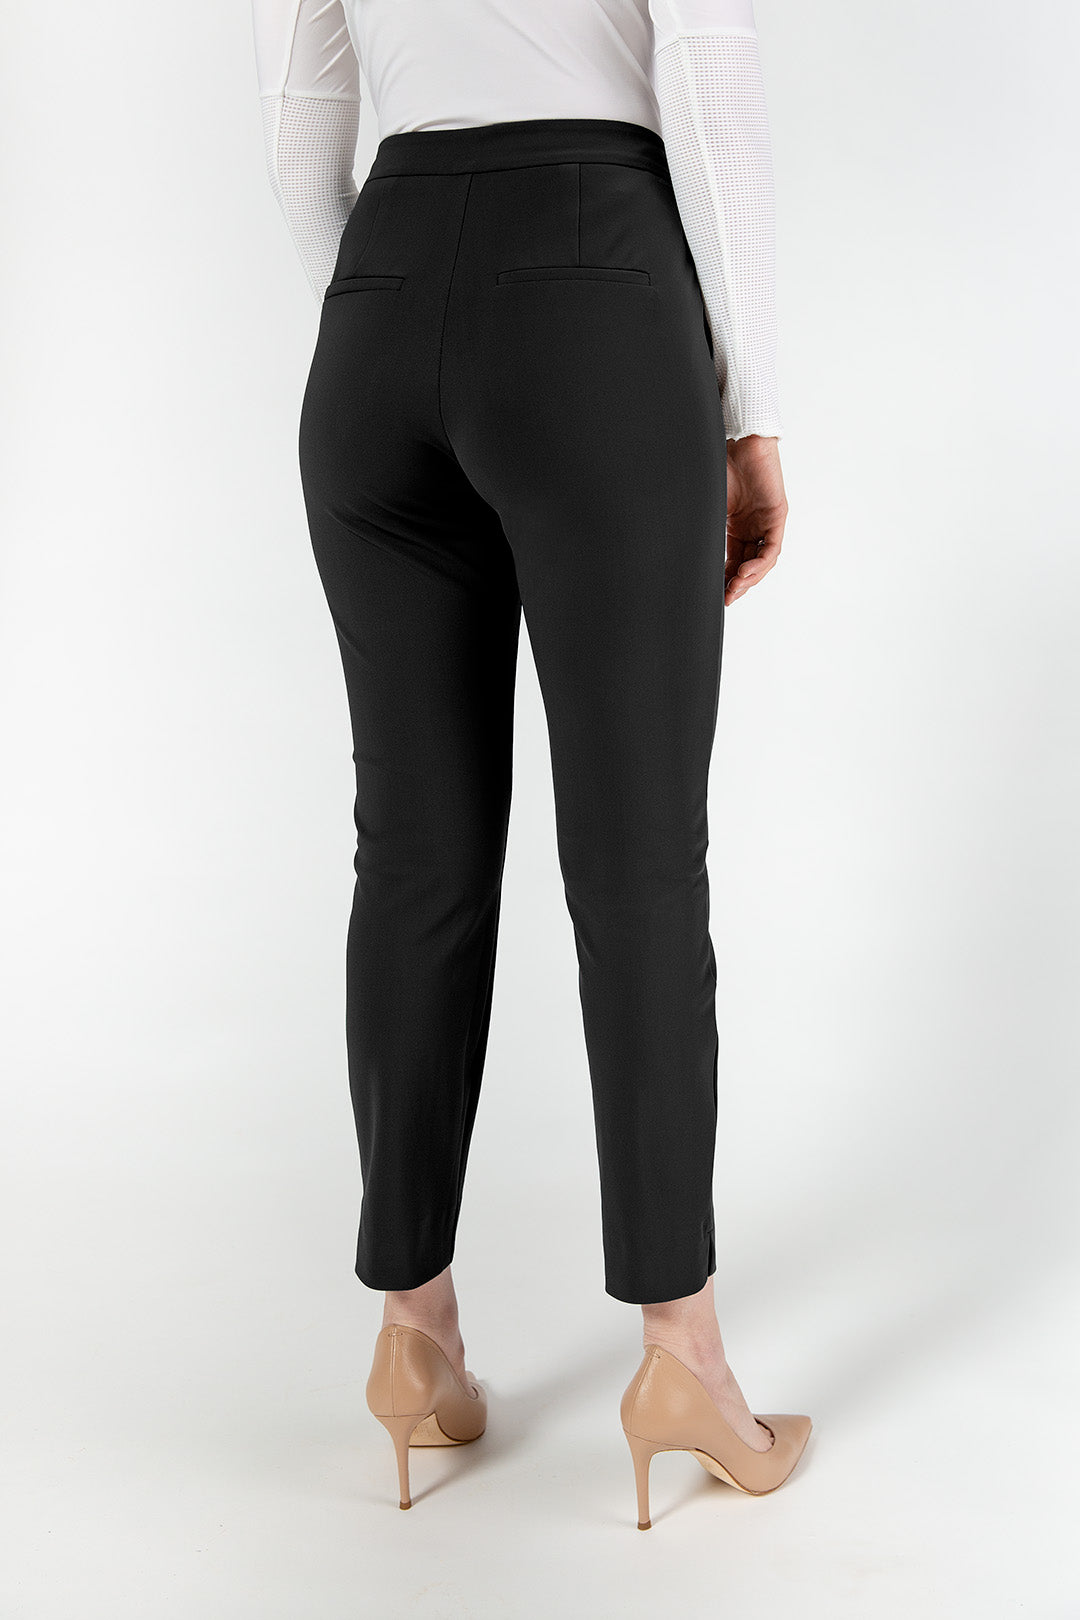 WORK TROUSERS - CLASSIC TIGHT FIT